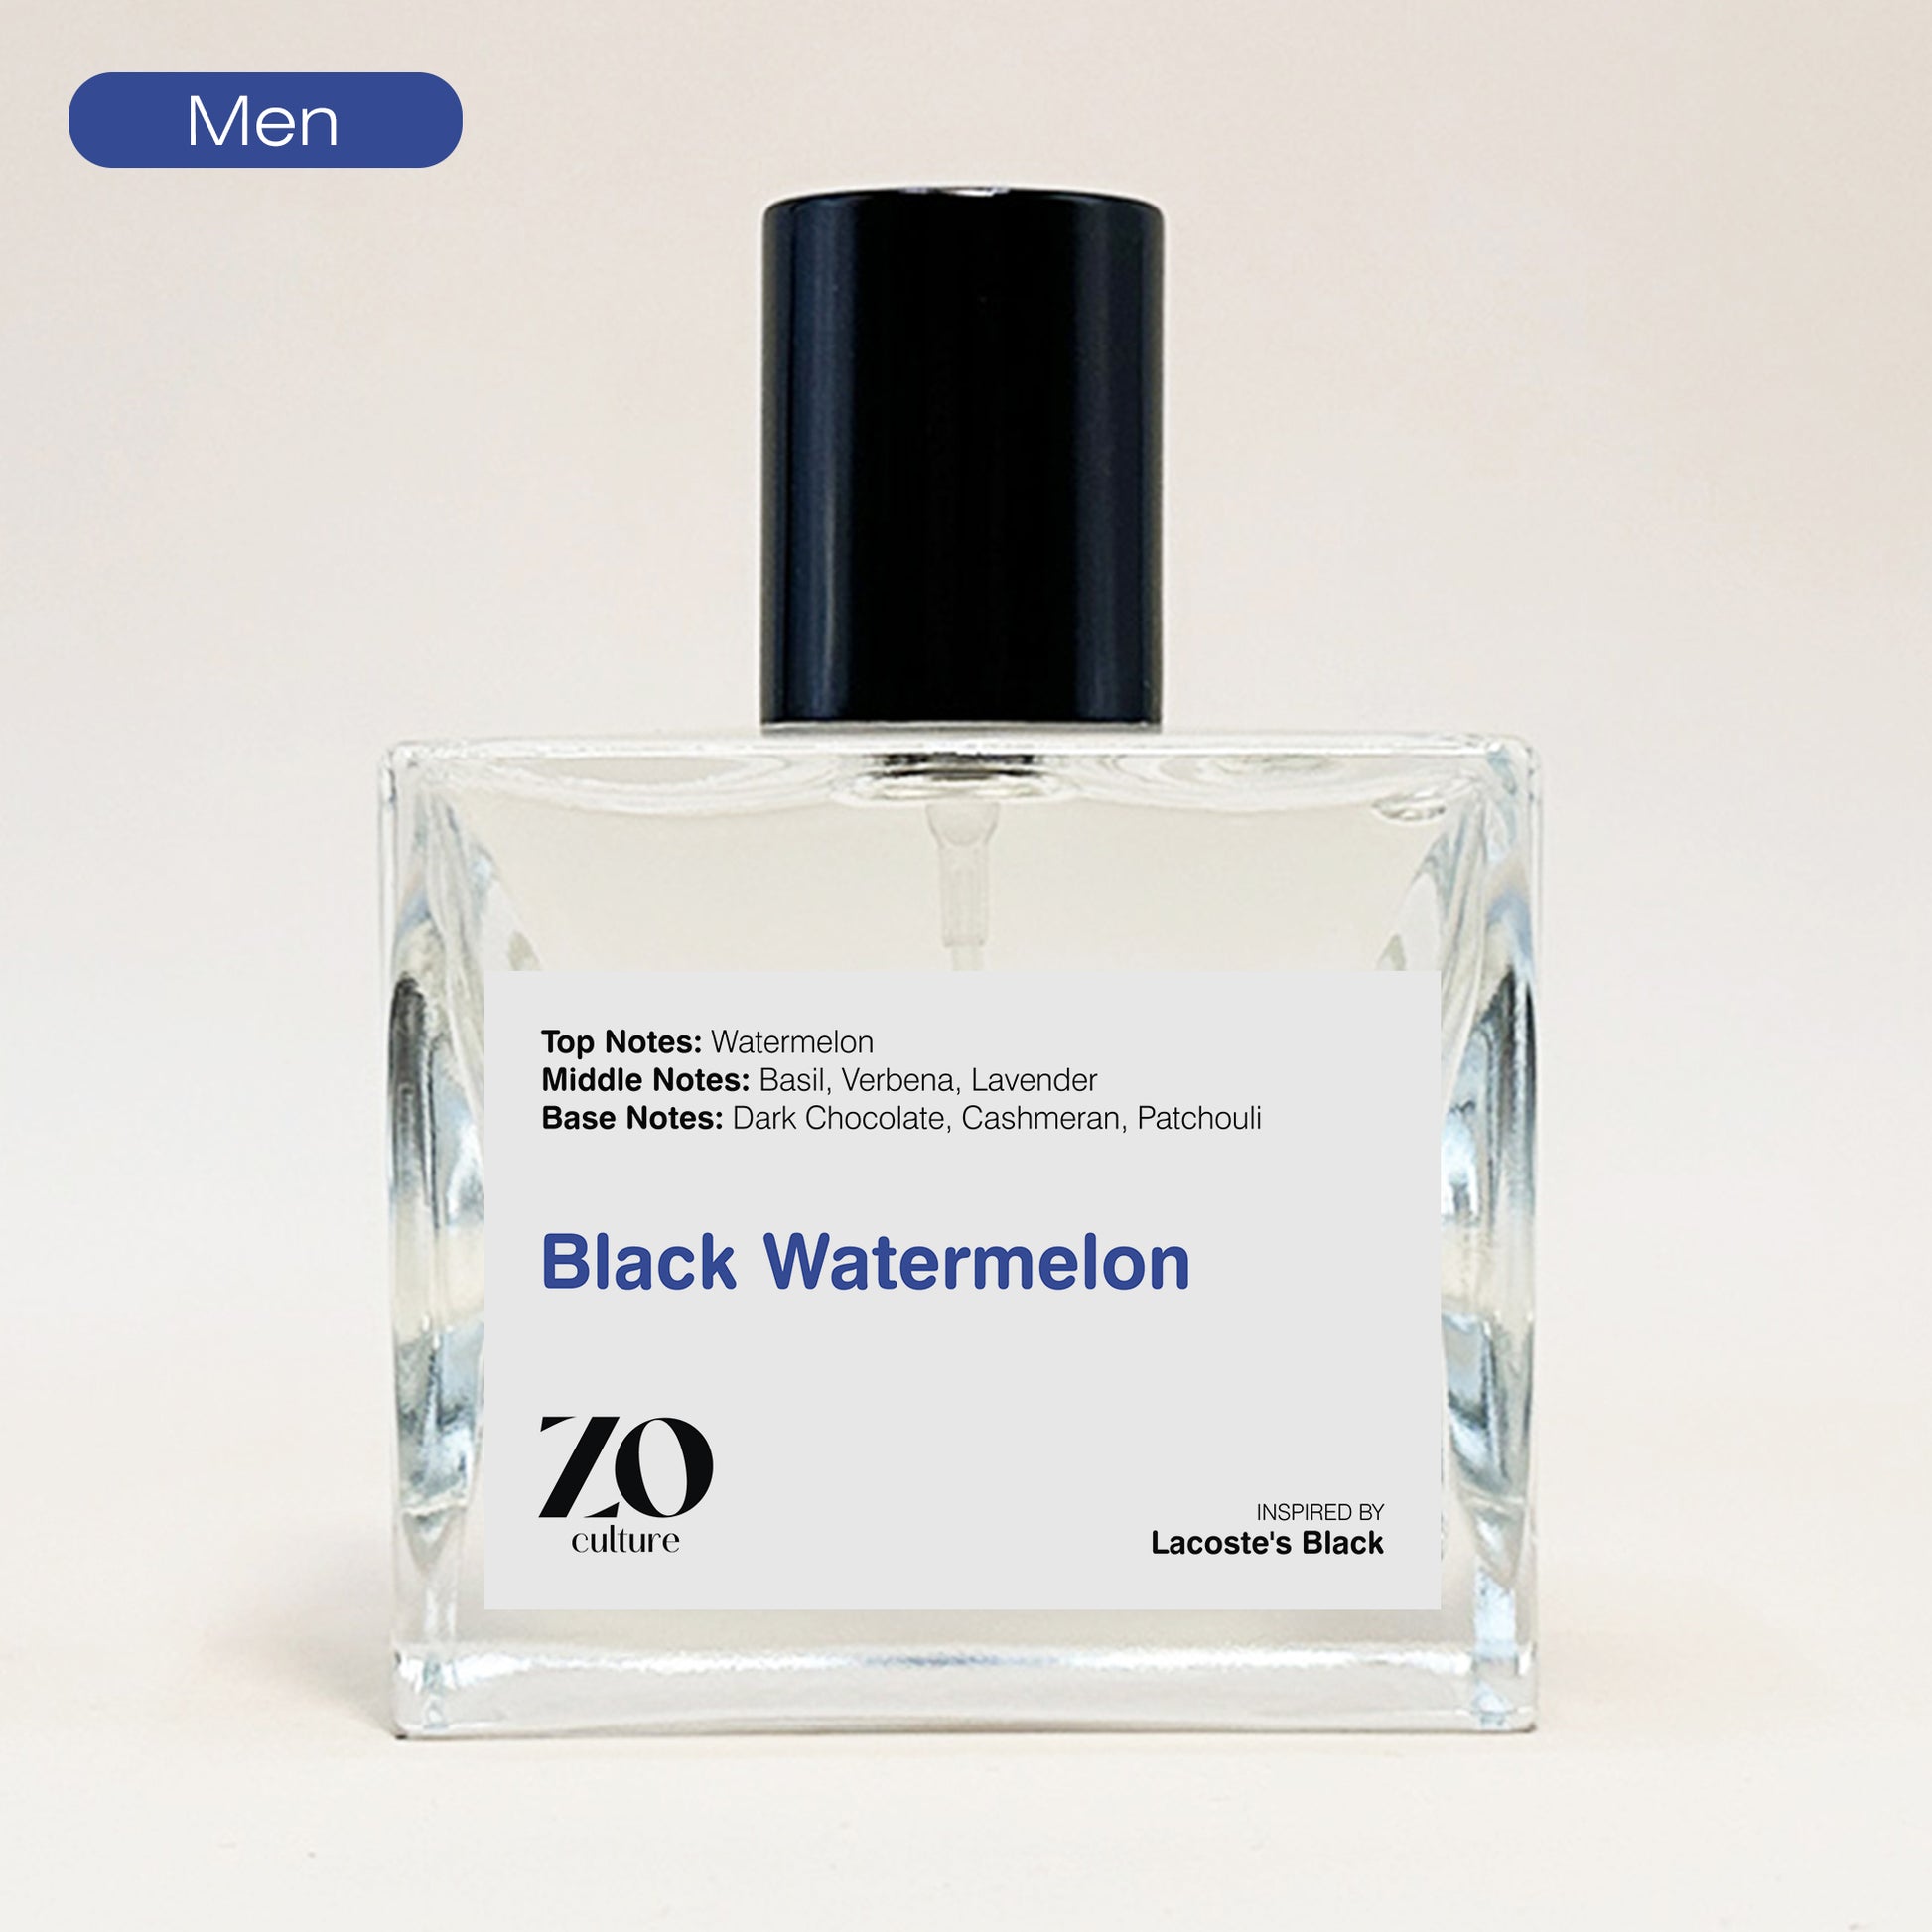 Men Perfume Black Watermelon - Inspired by Lacoste Black ZoCulture